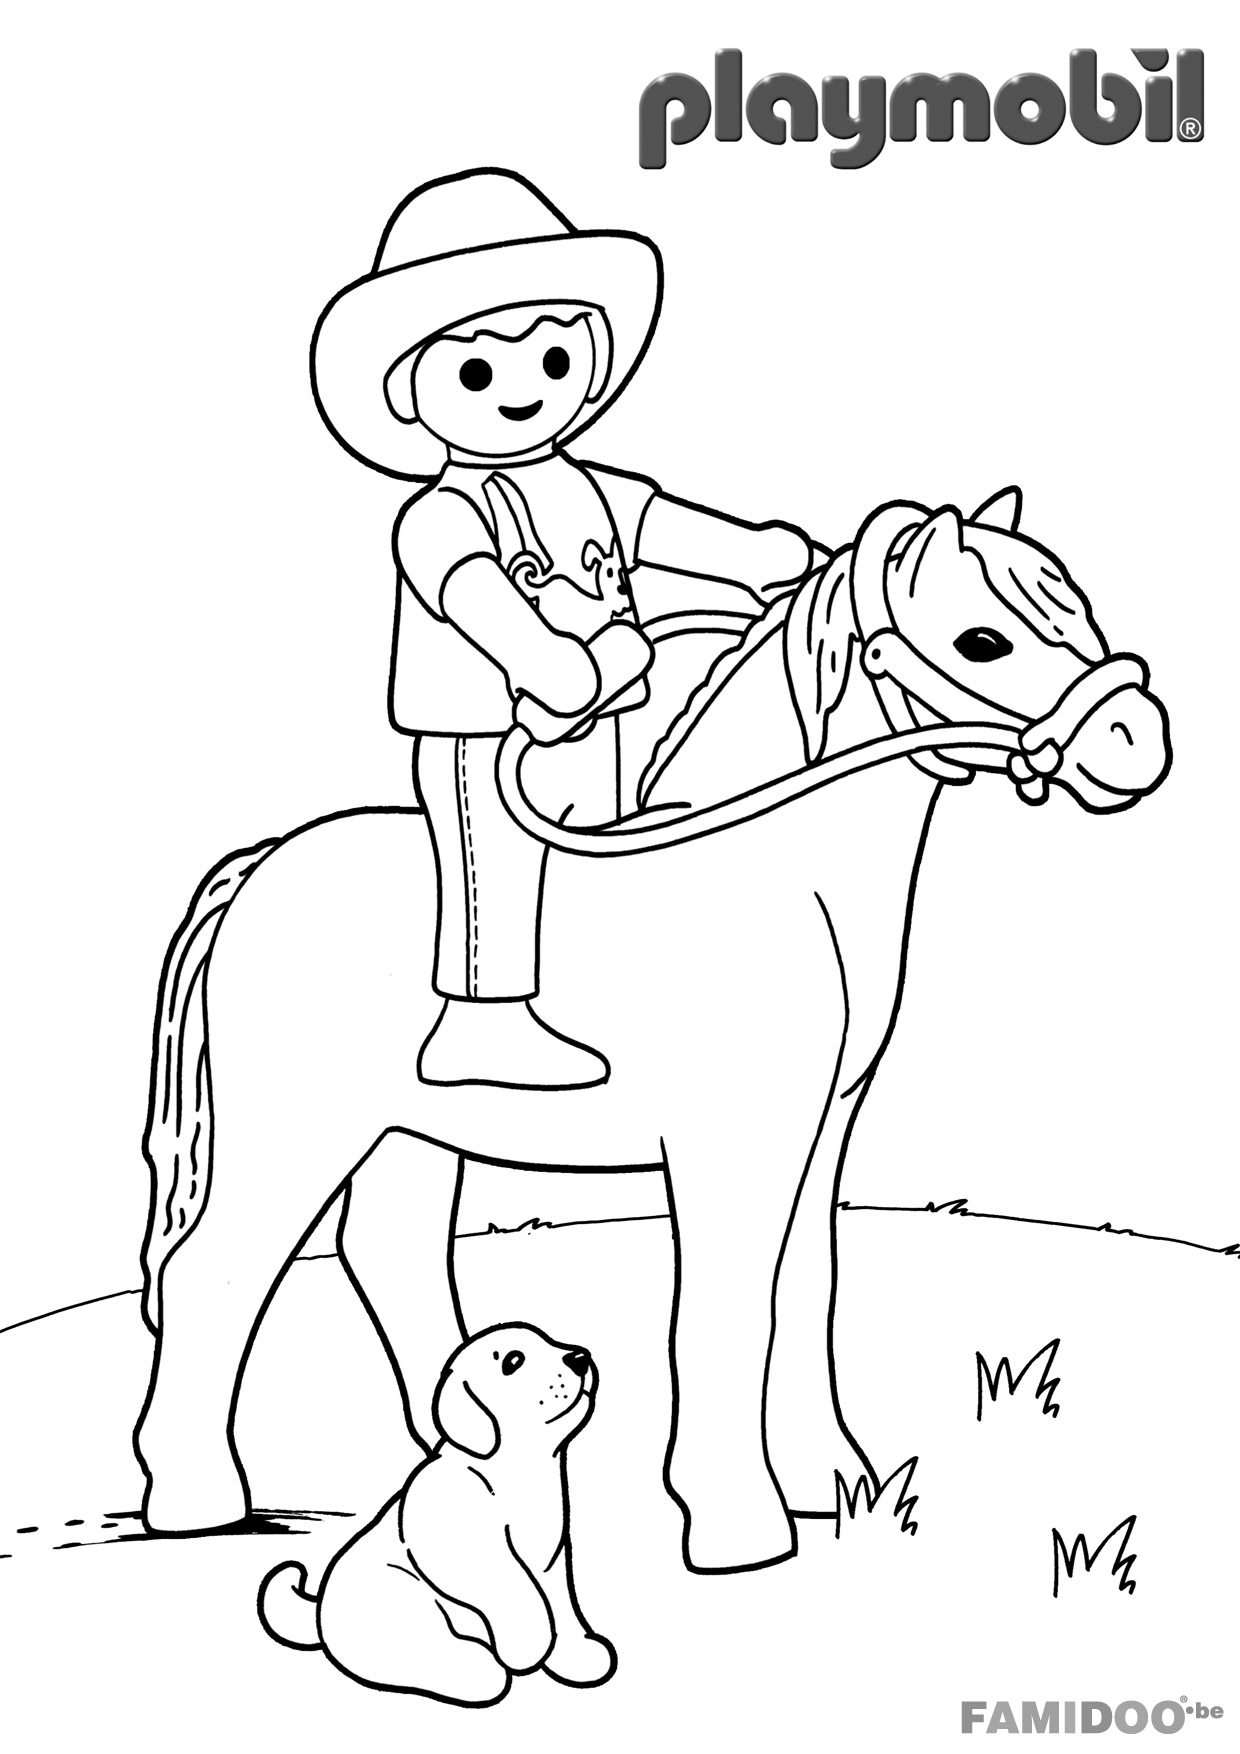 Coloring a Playmobil on a horse